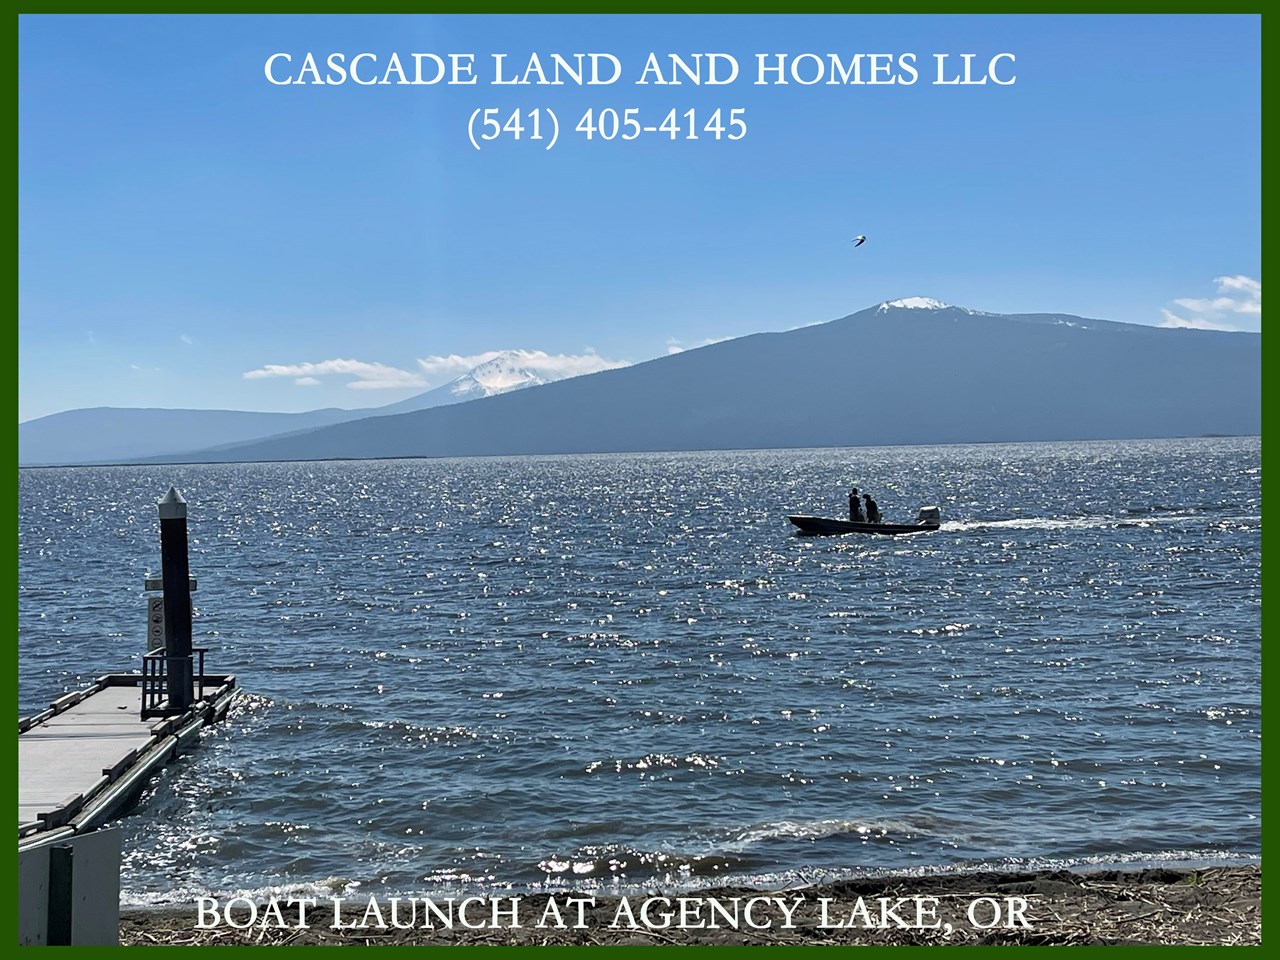 this photo was taken at the shoreline at agency lake at henzel park. snow-capped mt. mclaughlin is in the background. agency lake is a natural lake, considered to be part of the upper klamath lake, only connected by a narrow channel. it is fed by the wood river, one of the many rivers in the area. there are many nearby rivers and lakes for fishing, birdwatching, or playing in the water. these fishermen were headed in for the afternoon, the winds had started to pick up across the lake. if you are one of the lucky people to own a home or property here, you could wait for the wind to die down, eat some lunch, and make the mile and a half trip back down to the lake!